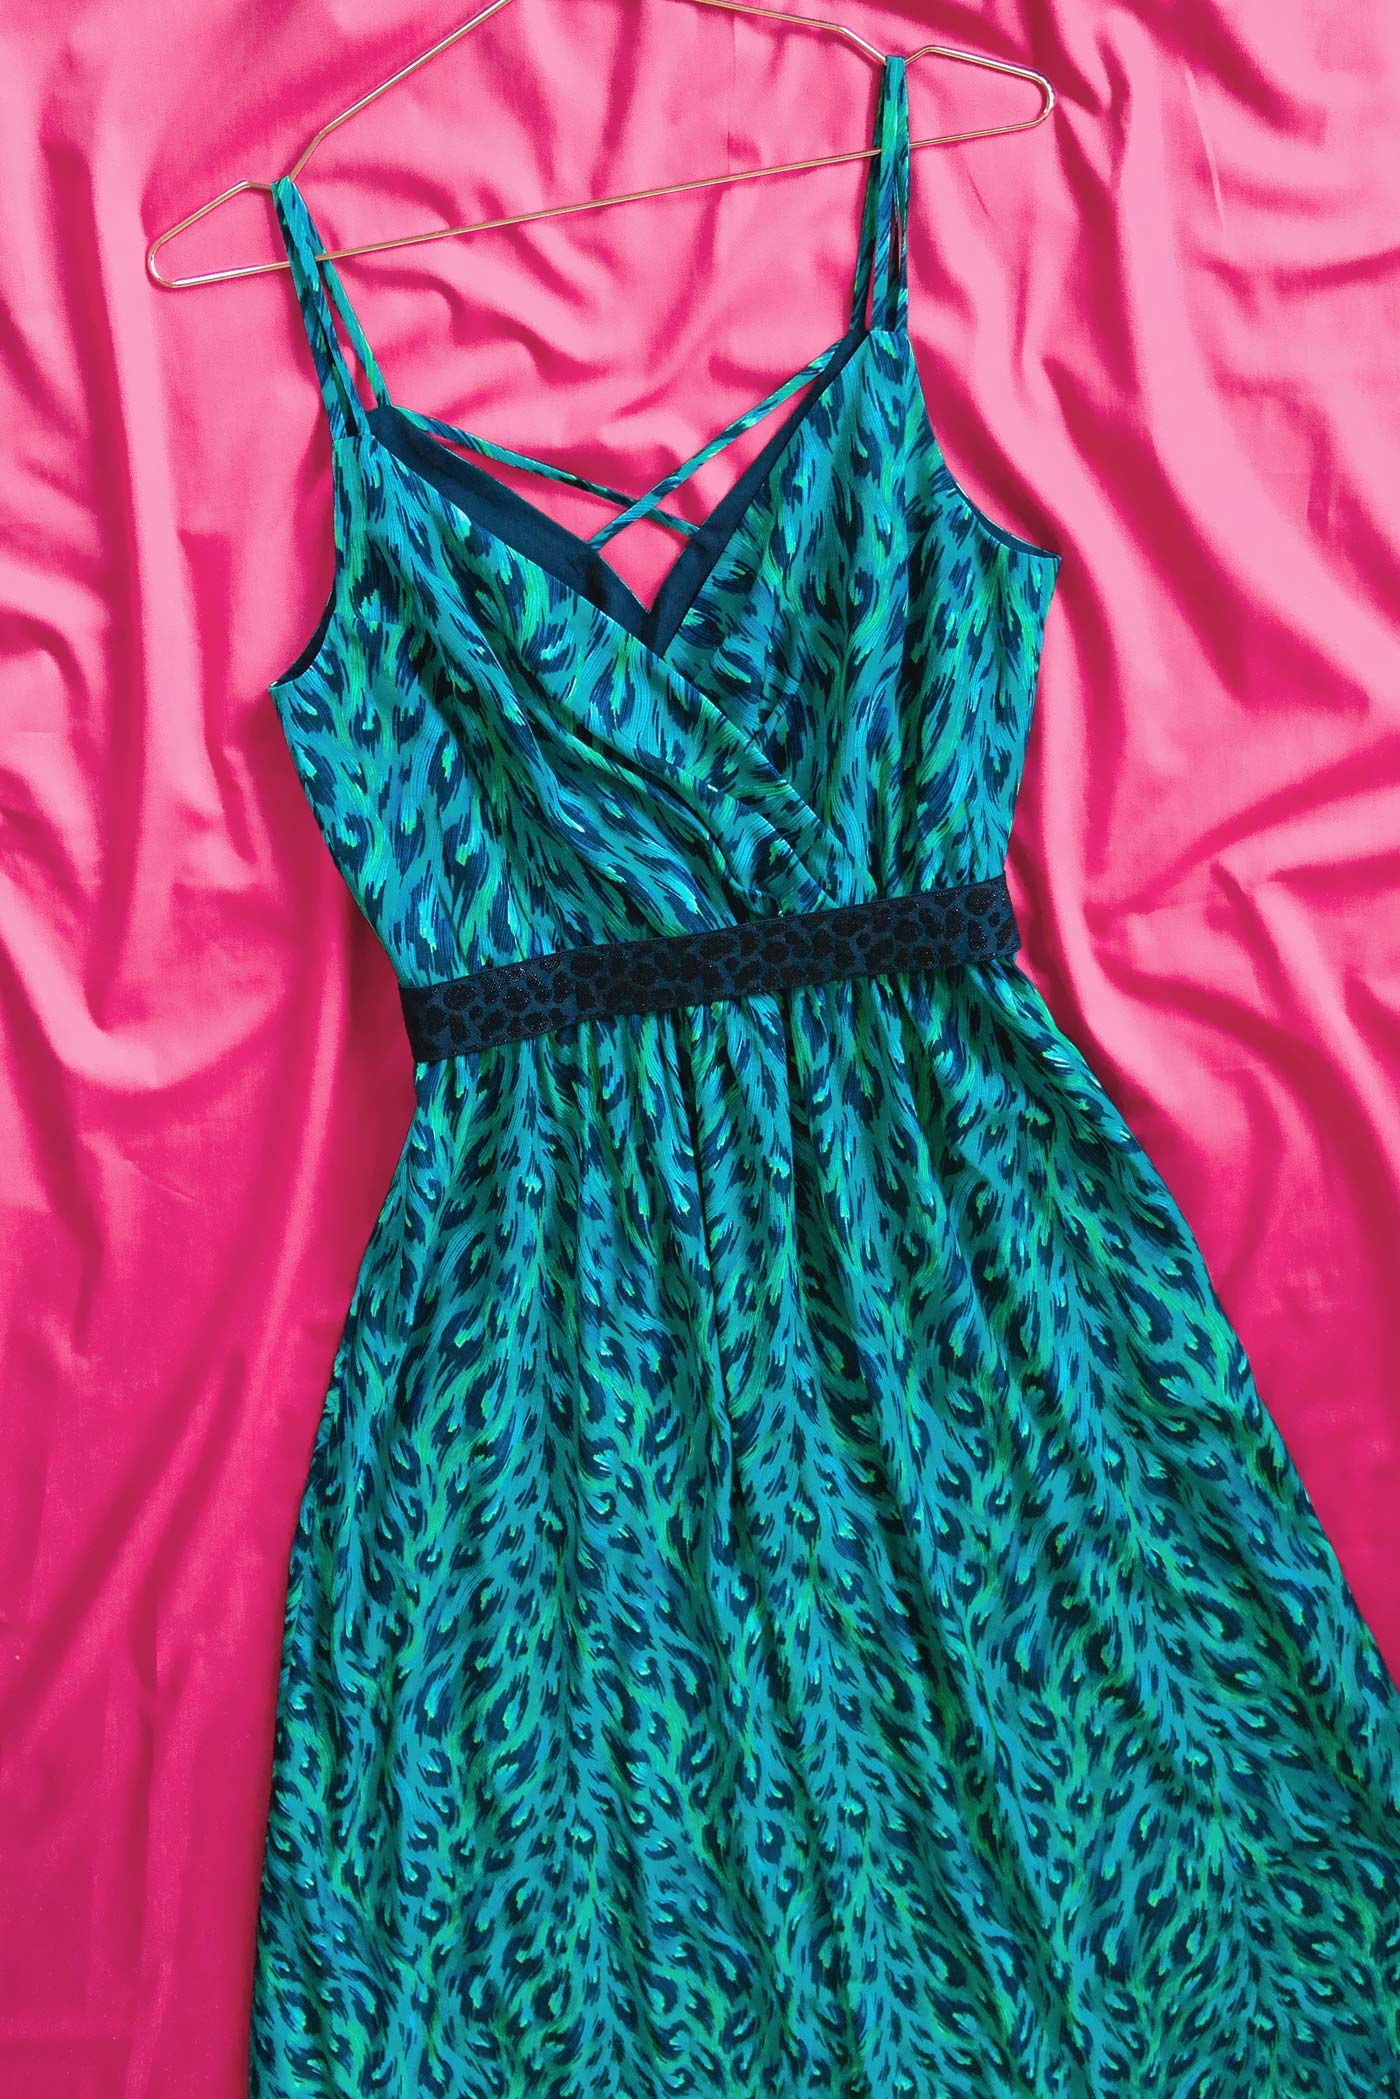 Teal leopard print wrap dress by Andrea Muller